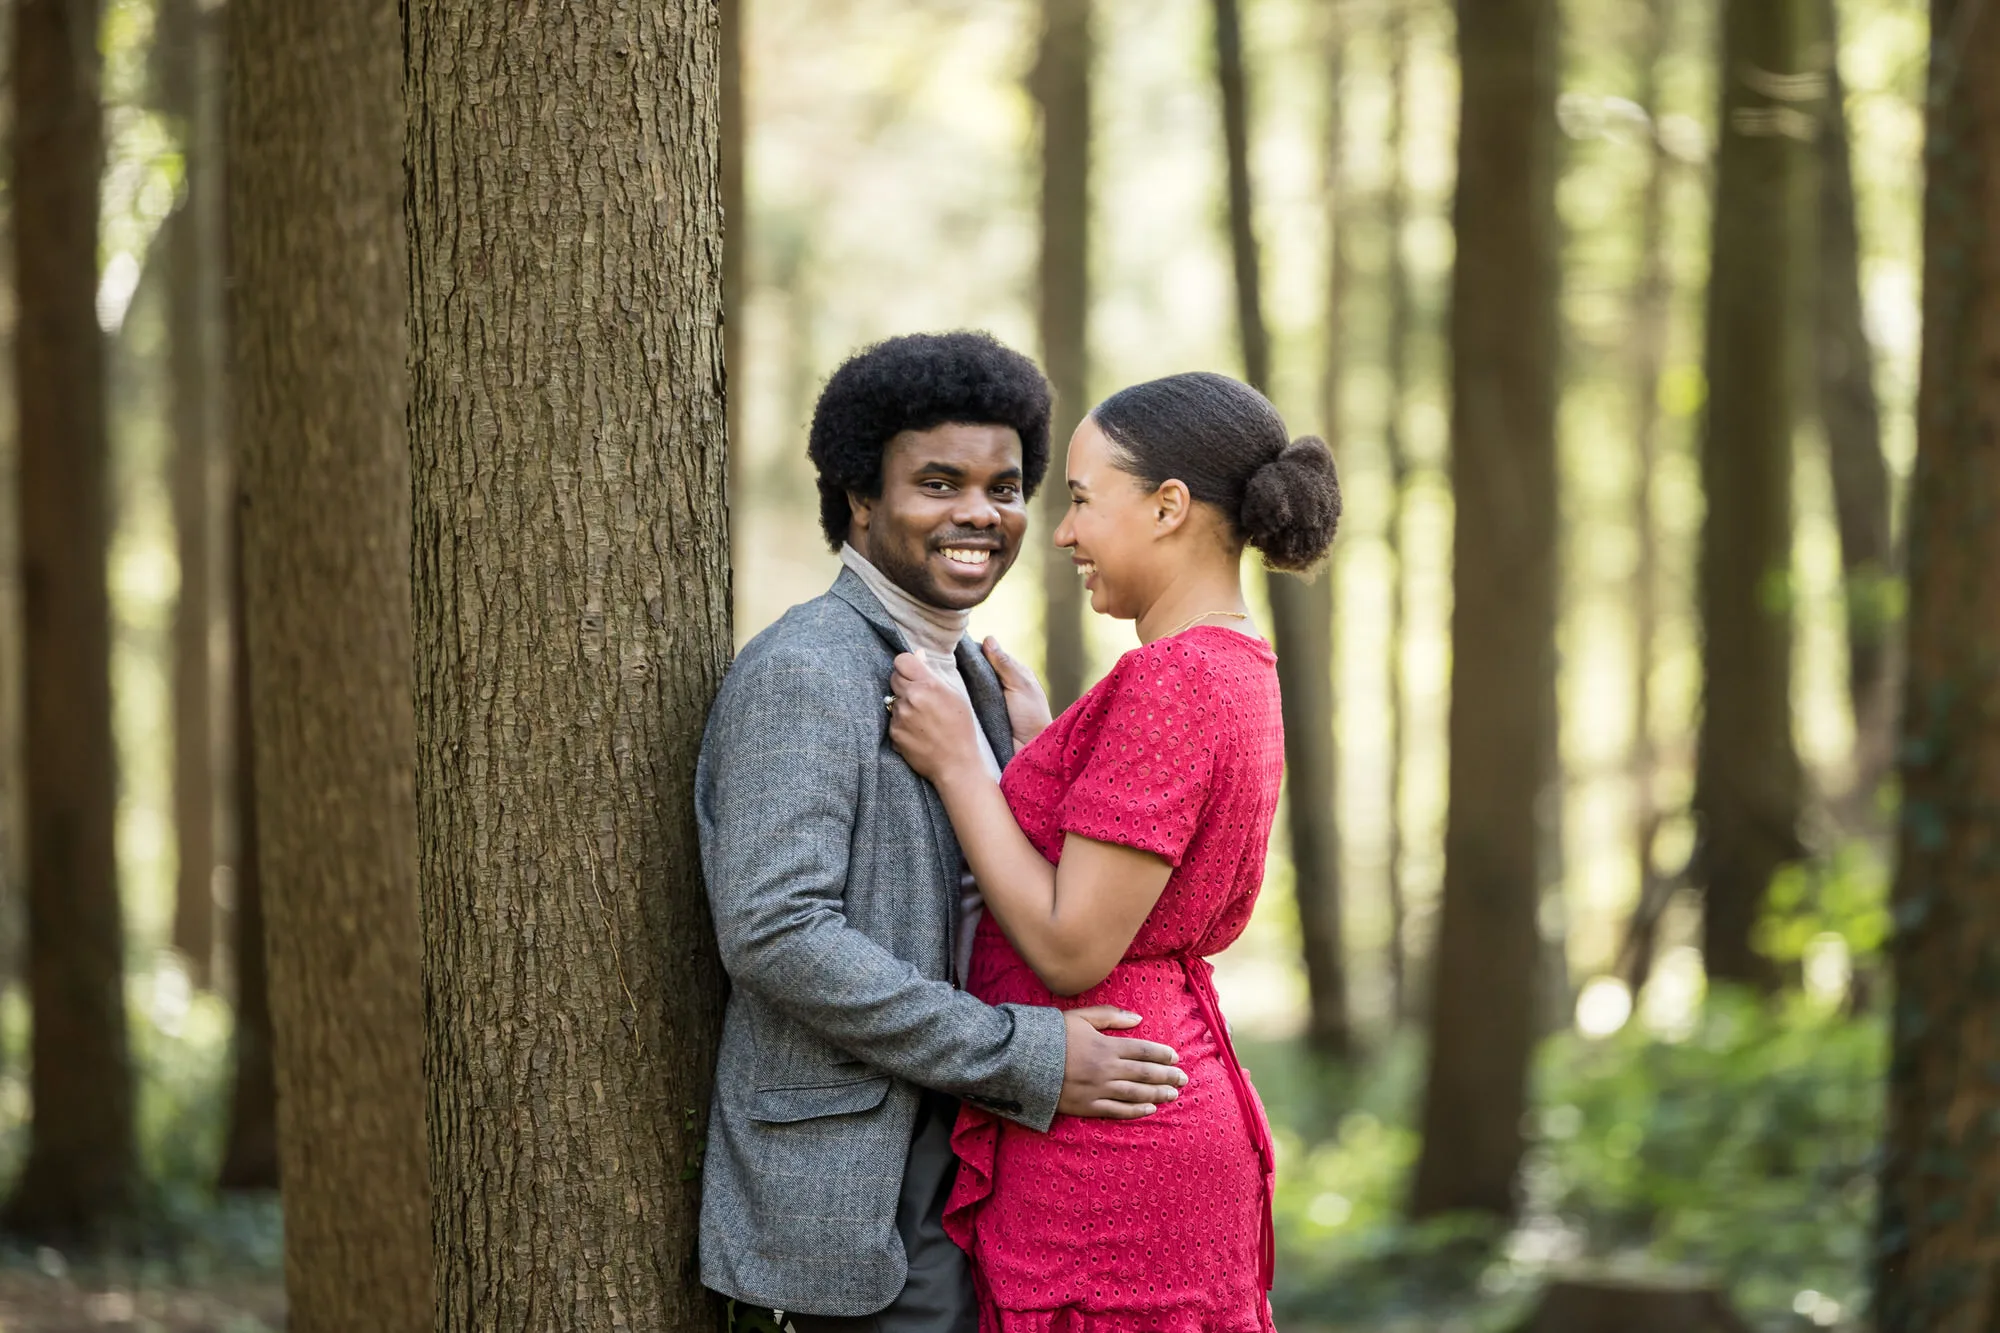 Engagement Photo Shoot - BAME couple in woodland share an intimate moment.